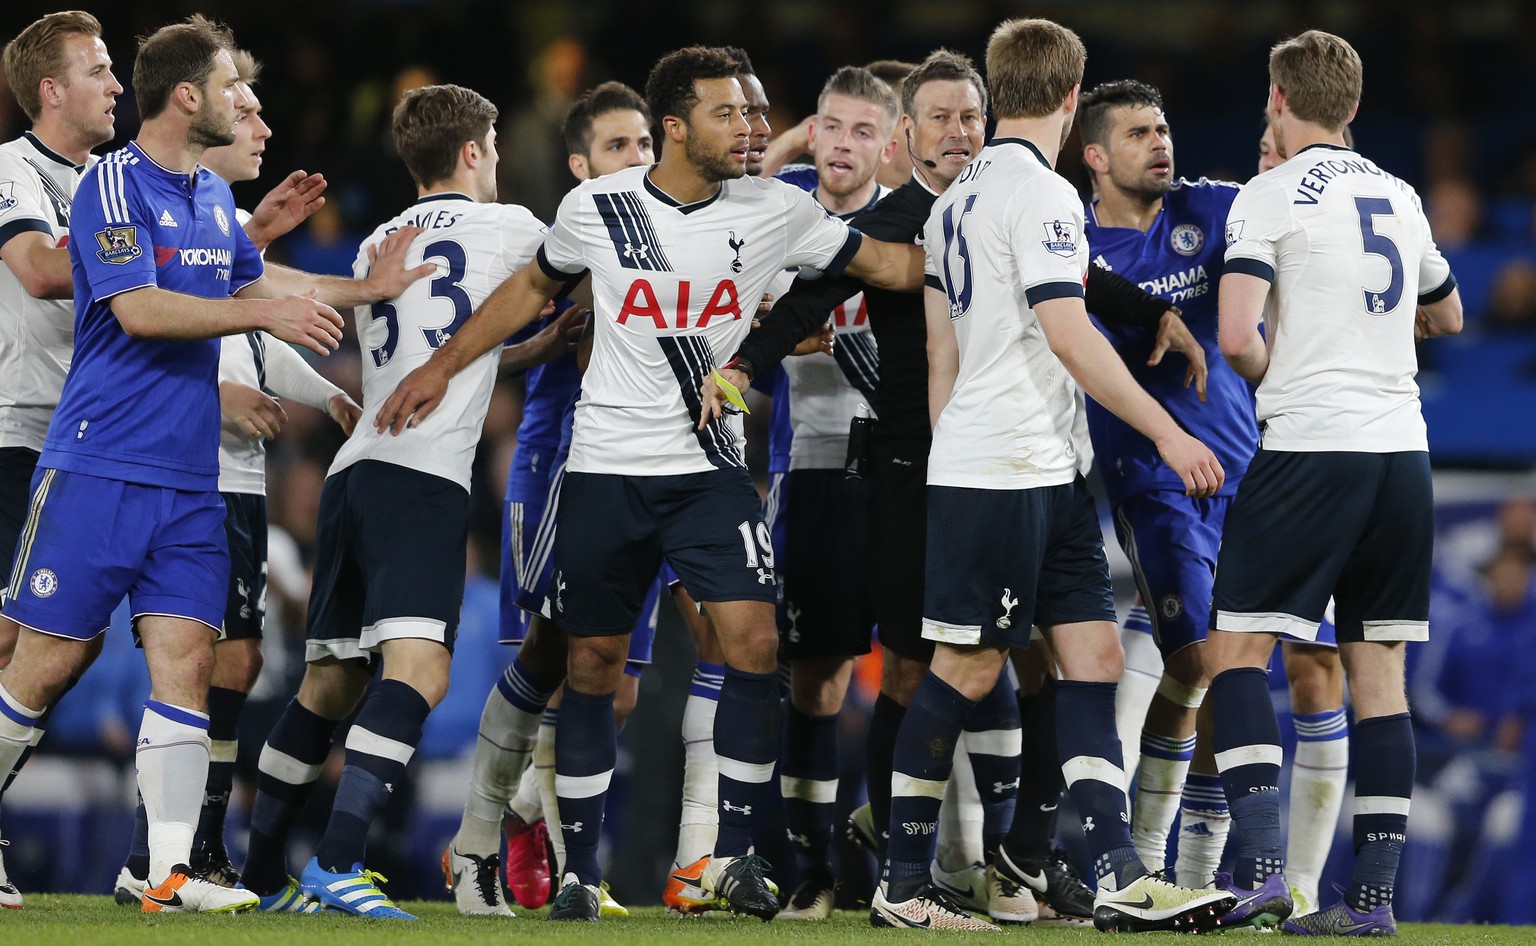 FILE - In this Monday, May 2, 2016 file photo, referee Mark Clattenburg talks with Chelsea and Tottenham Hotspur players during the English Premier League soccer match at Stamford Bridge stadium in Lo ...